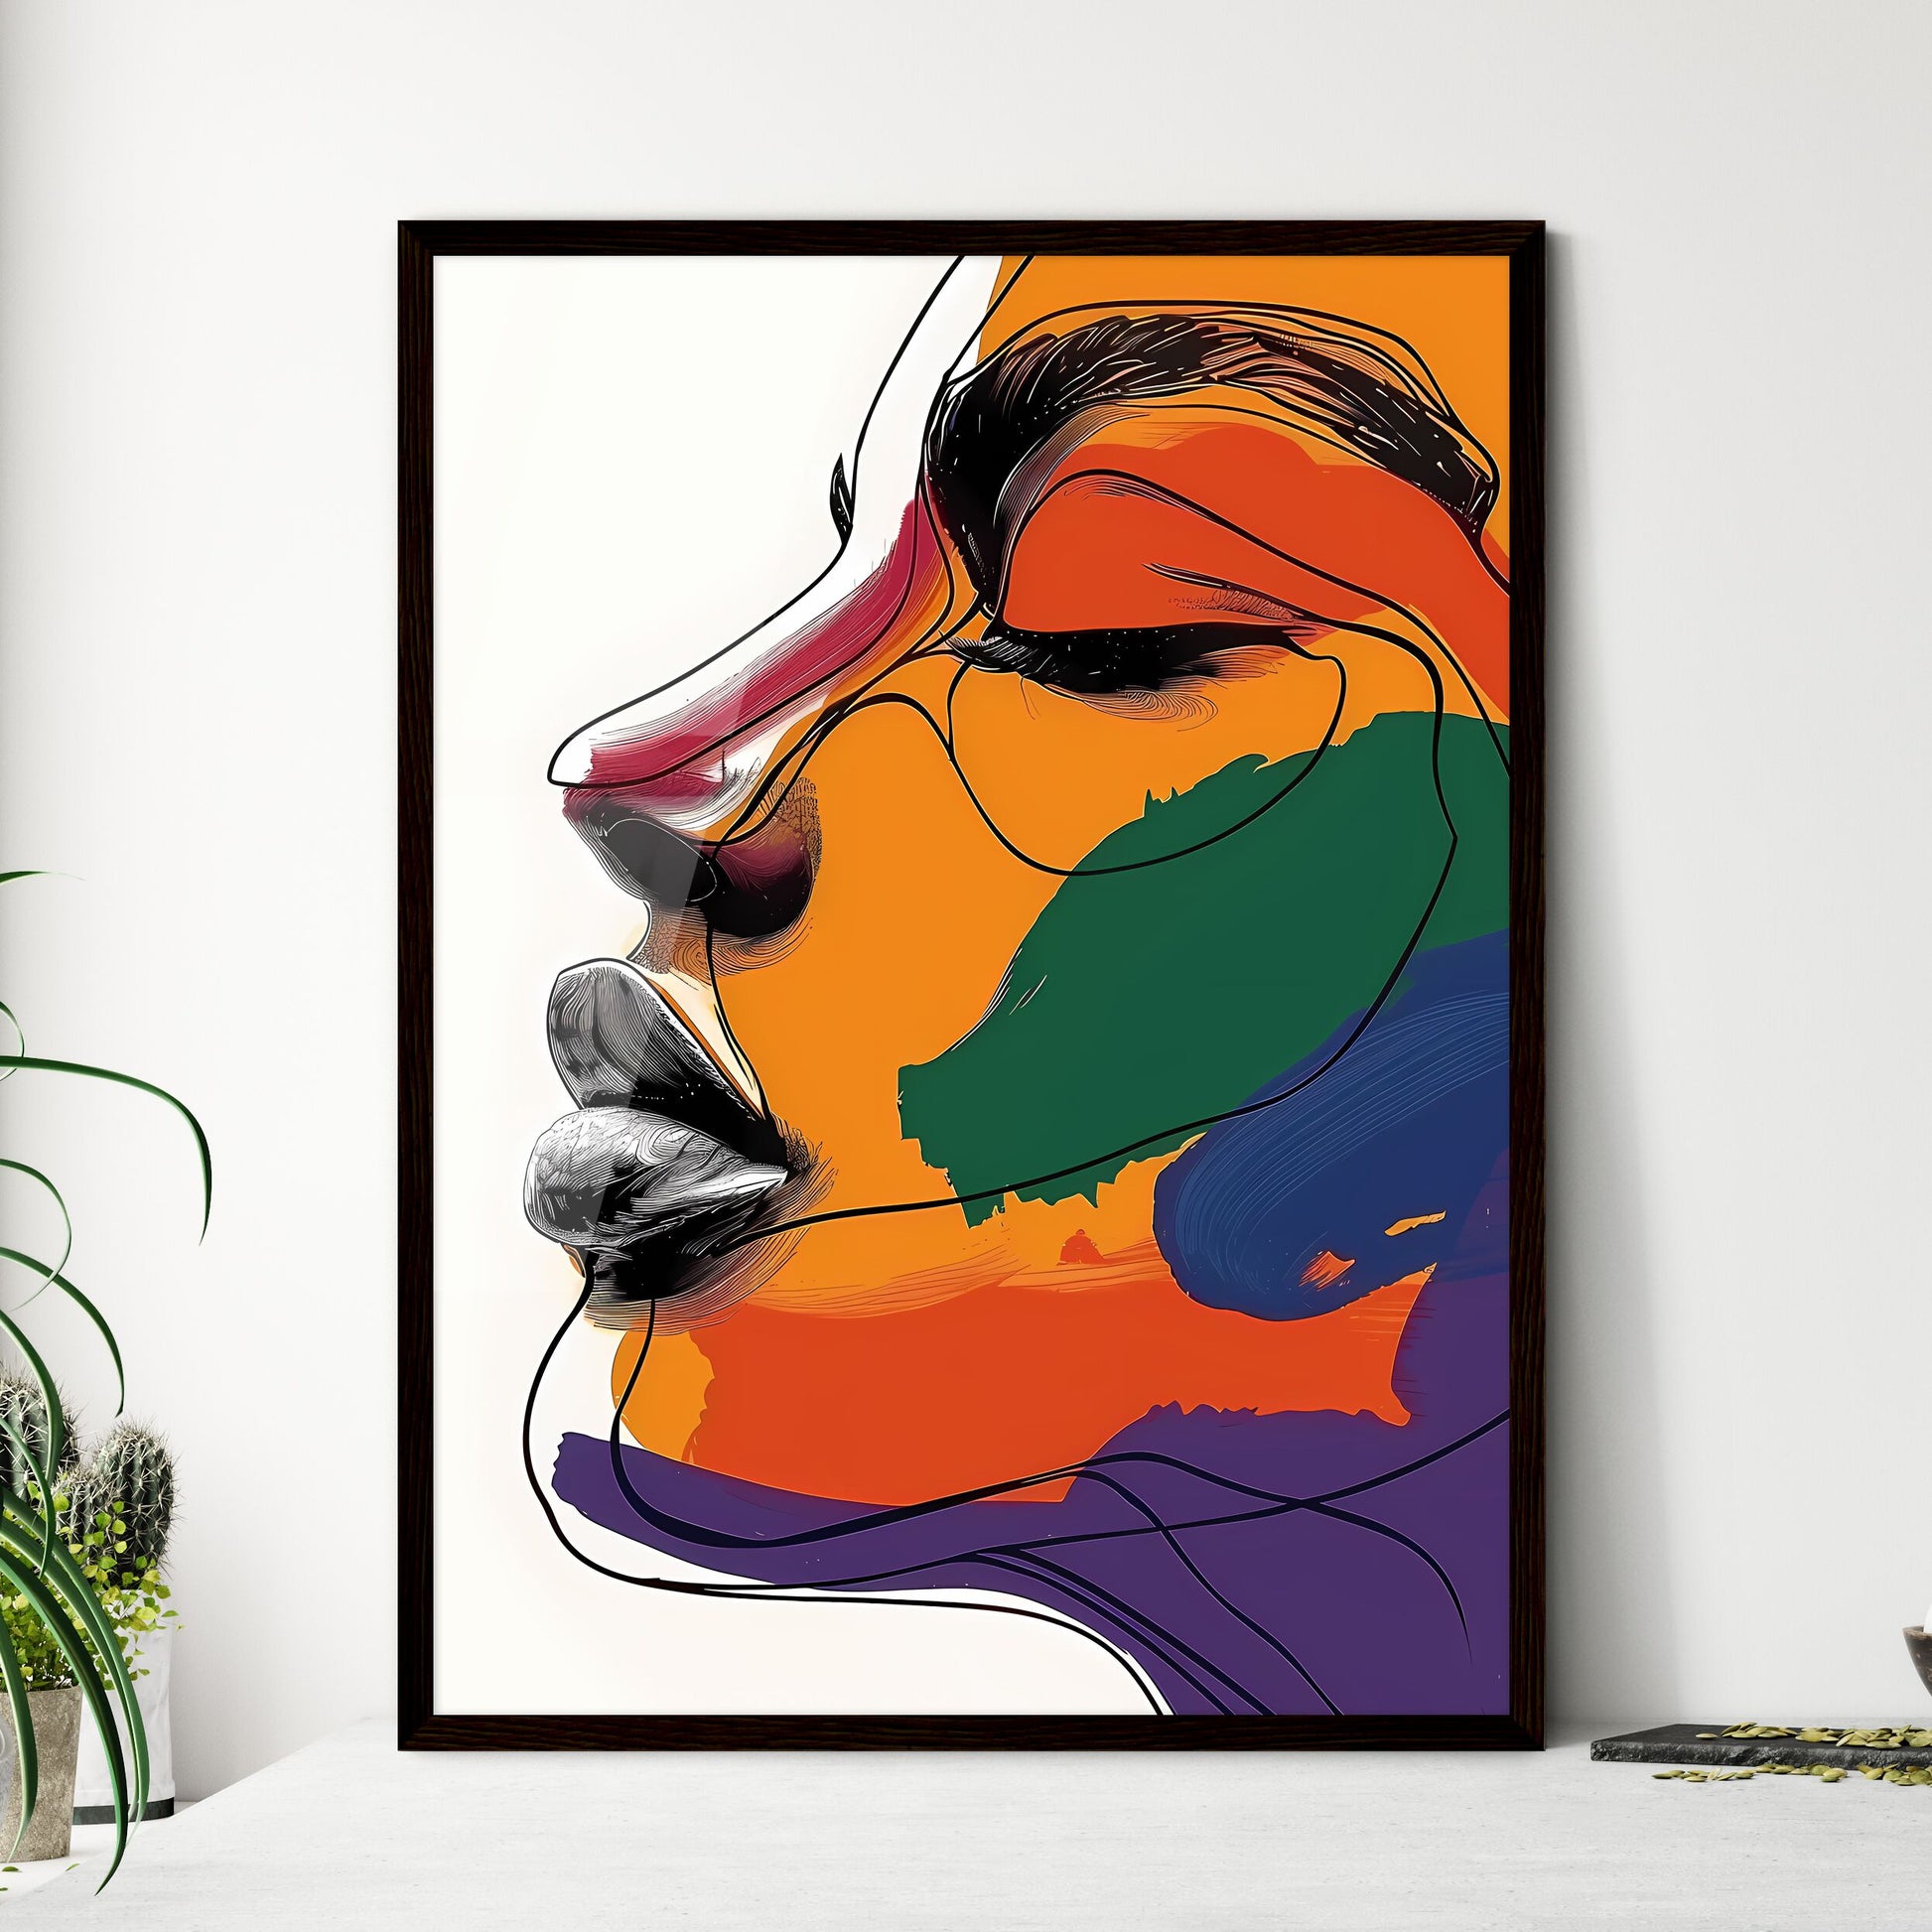 Whimsical Modern Abstract Wall Art Print: Vibrant Cutaway Outline of a Thoughtful Face on White Background Default Title